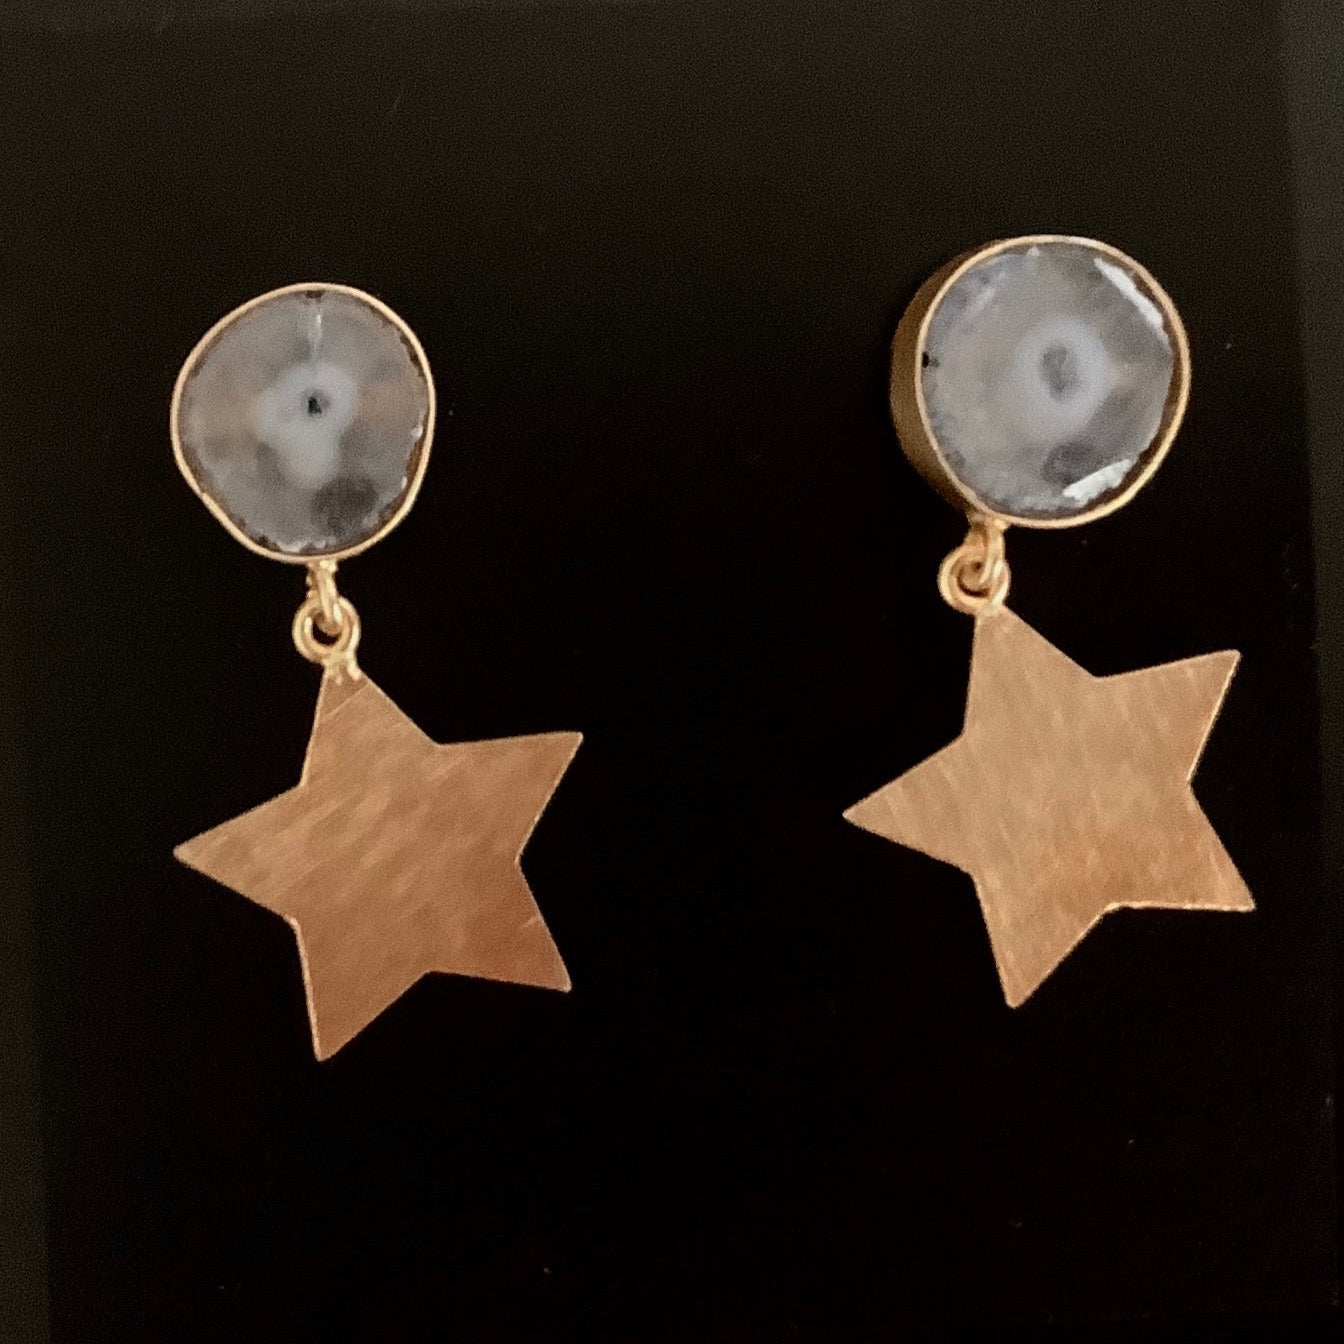 The Black Druzy stone with star Earrings